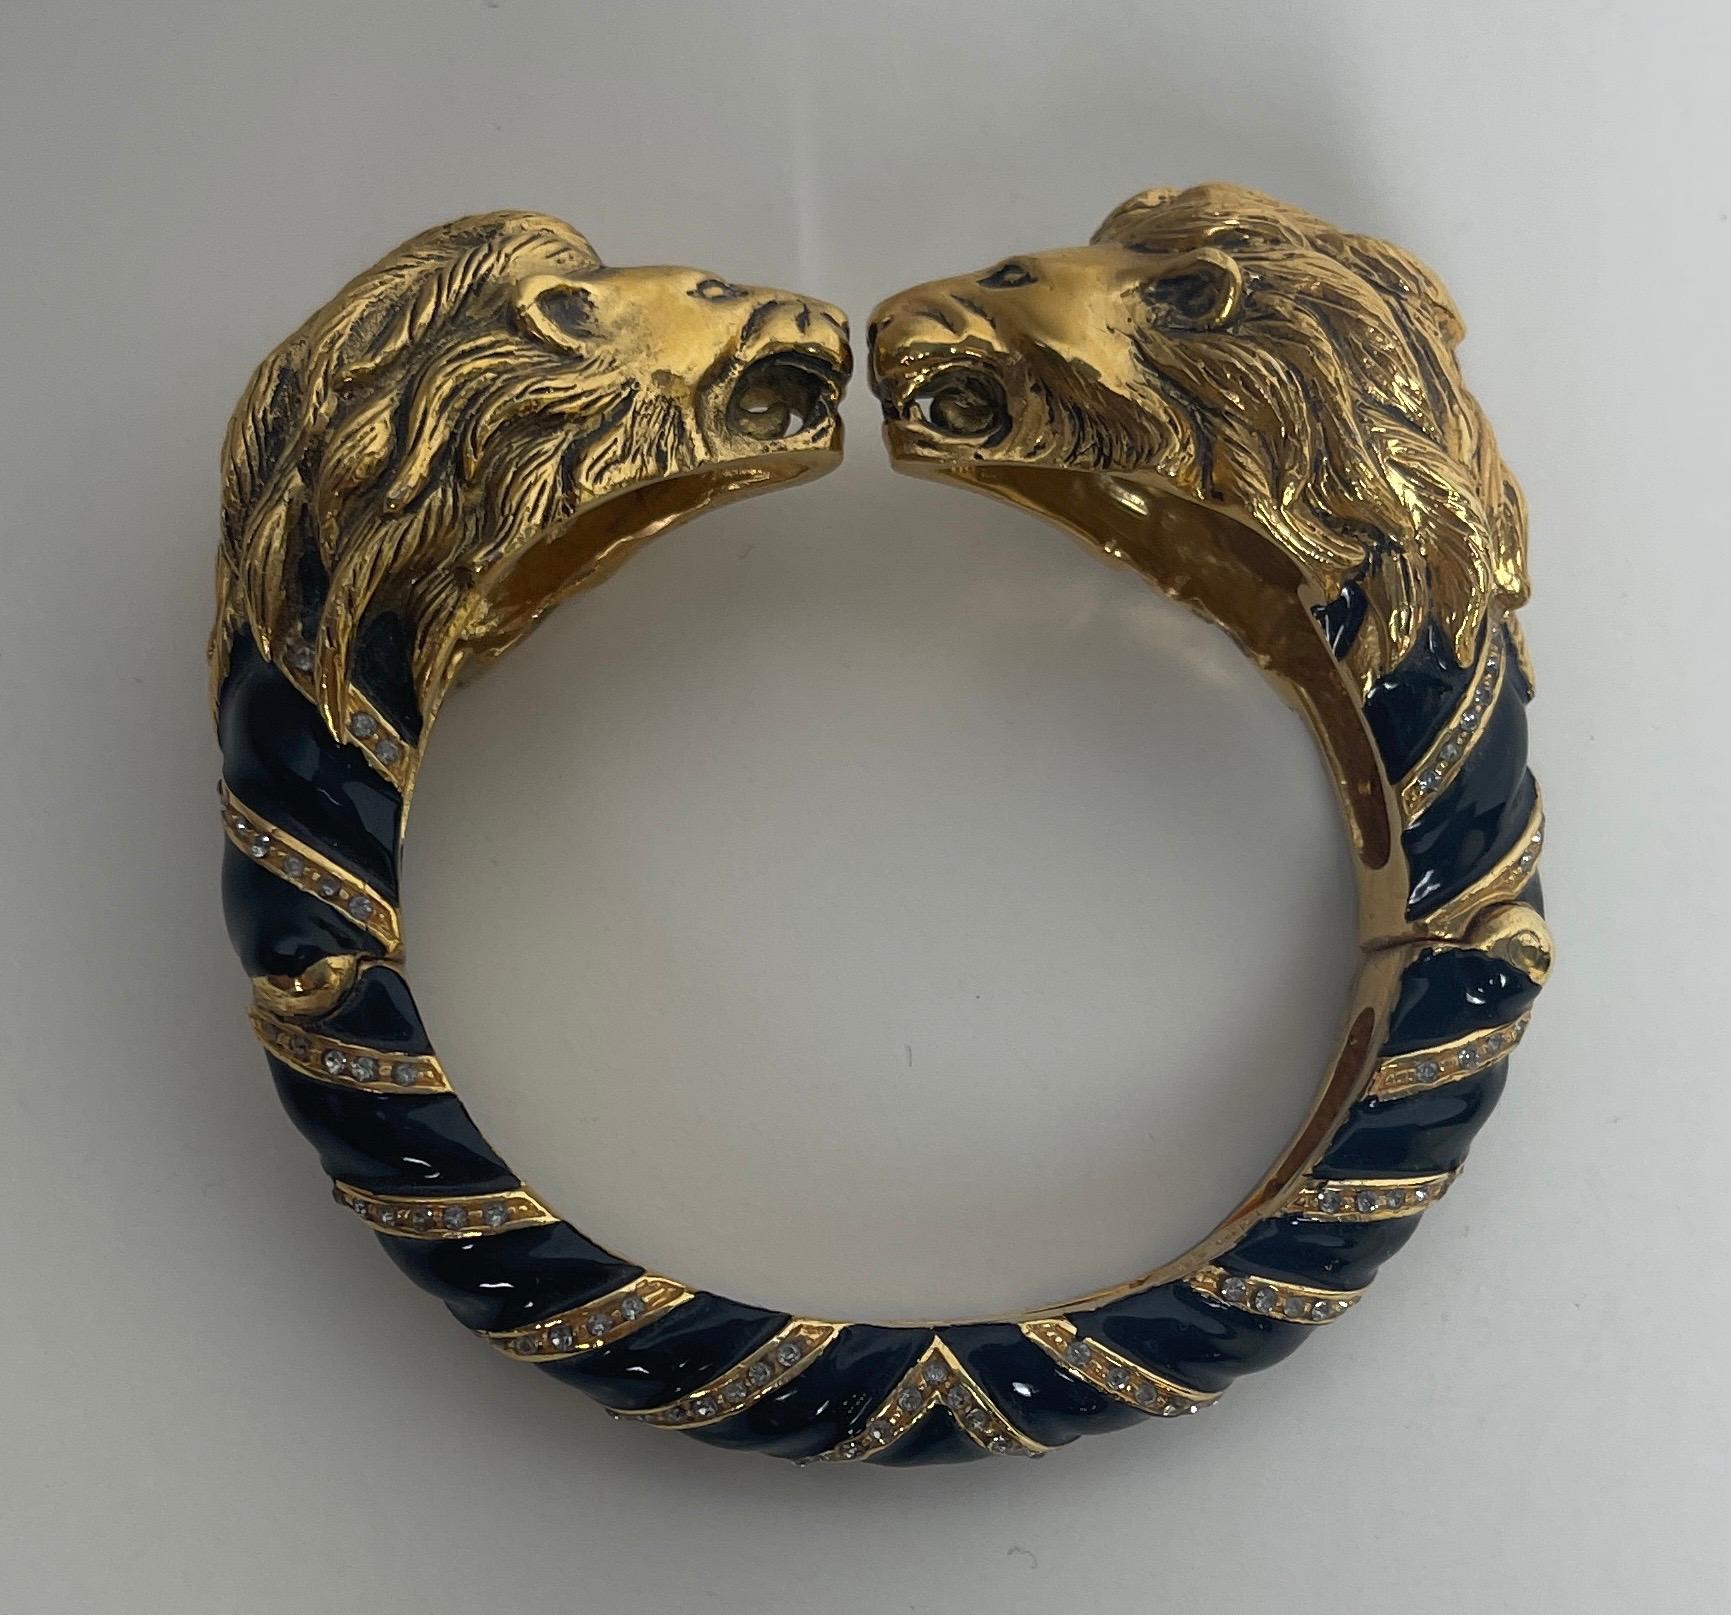 Roberto Cavalli Lion Head Bangle Bracelet

Materials: metal, enamel, crystals
Hallmarks: Roberto Cavalli MADE IN ITALY
Closure/Opening: Double hinge
Overall Condition: Excellent pre-owned condition with light wear
Estimated Retail: $325 plus